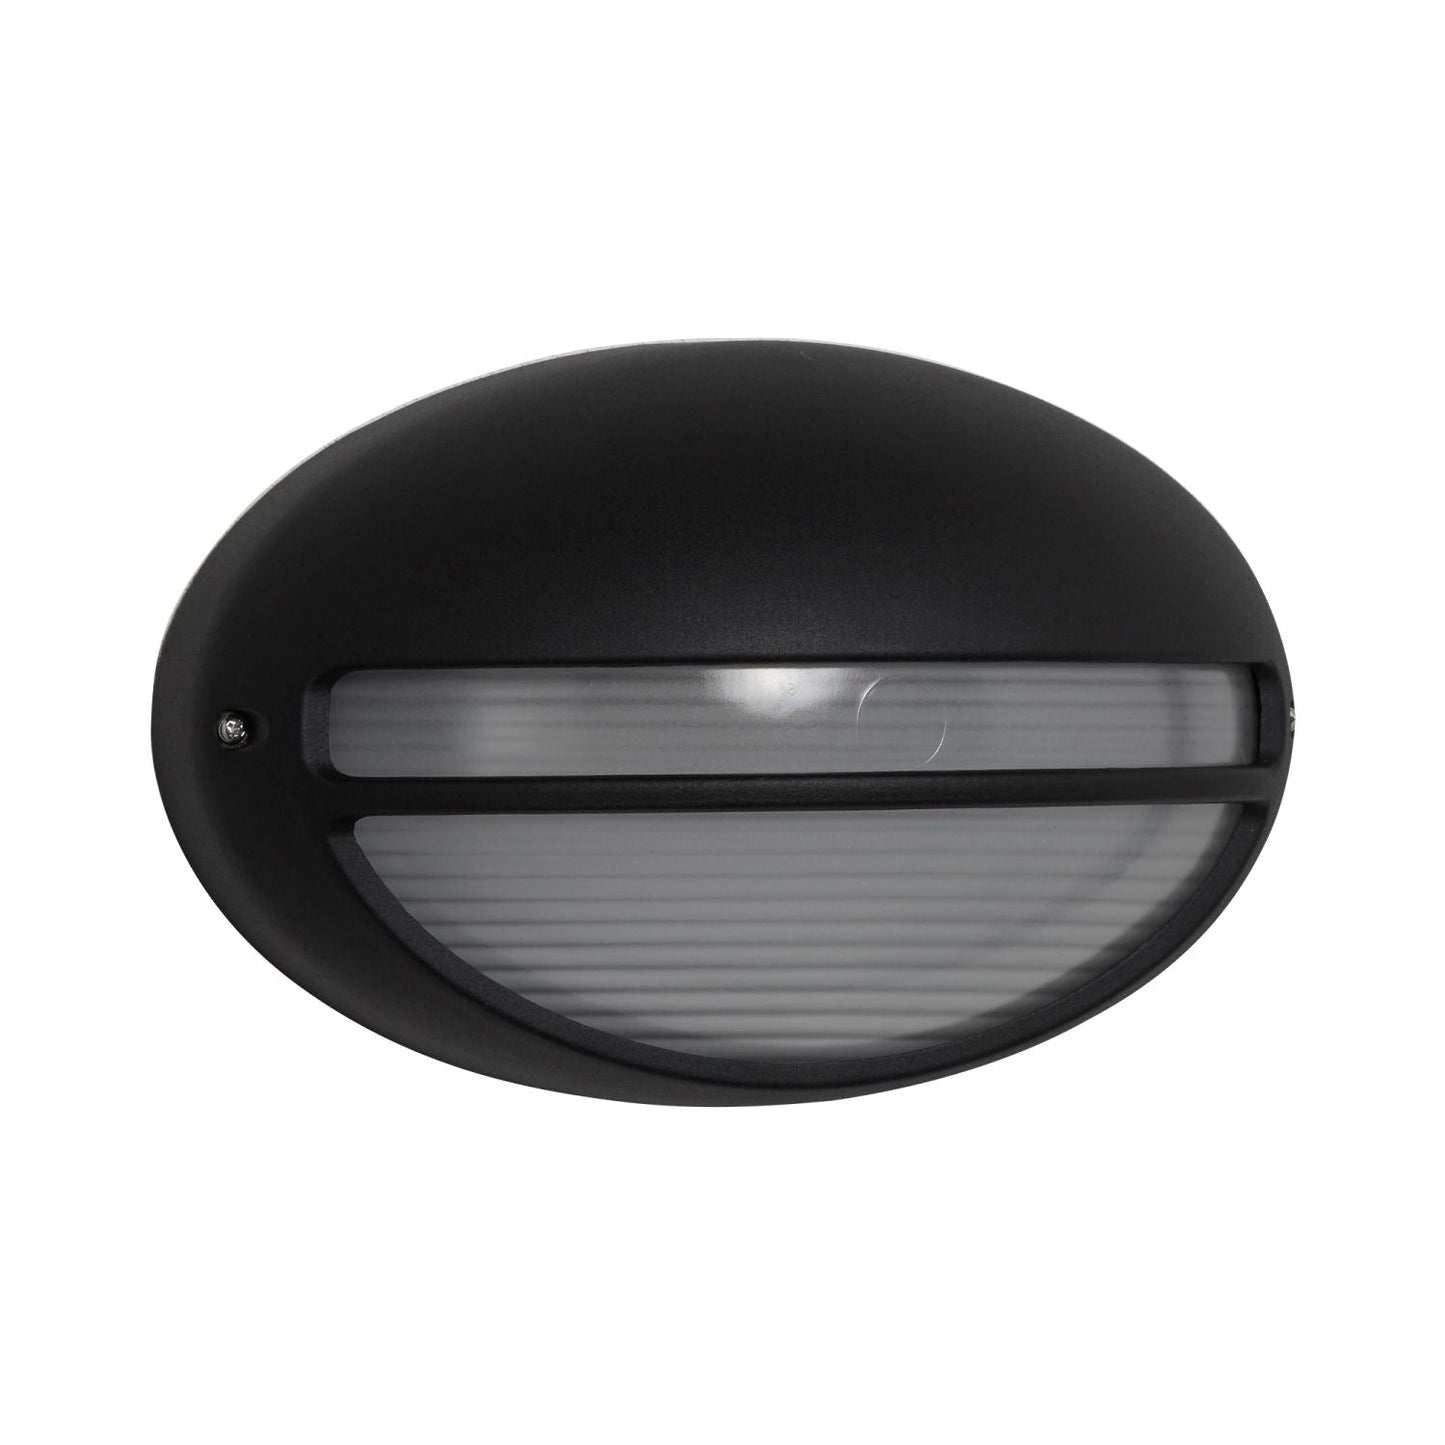 Black Oval Outdoor Light With Ridged Glass